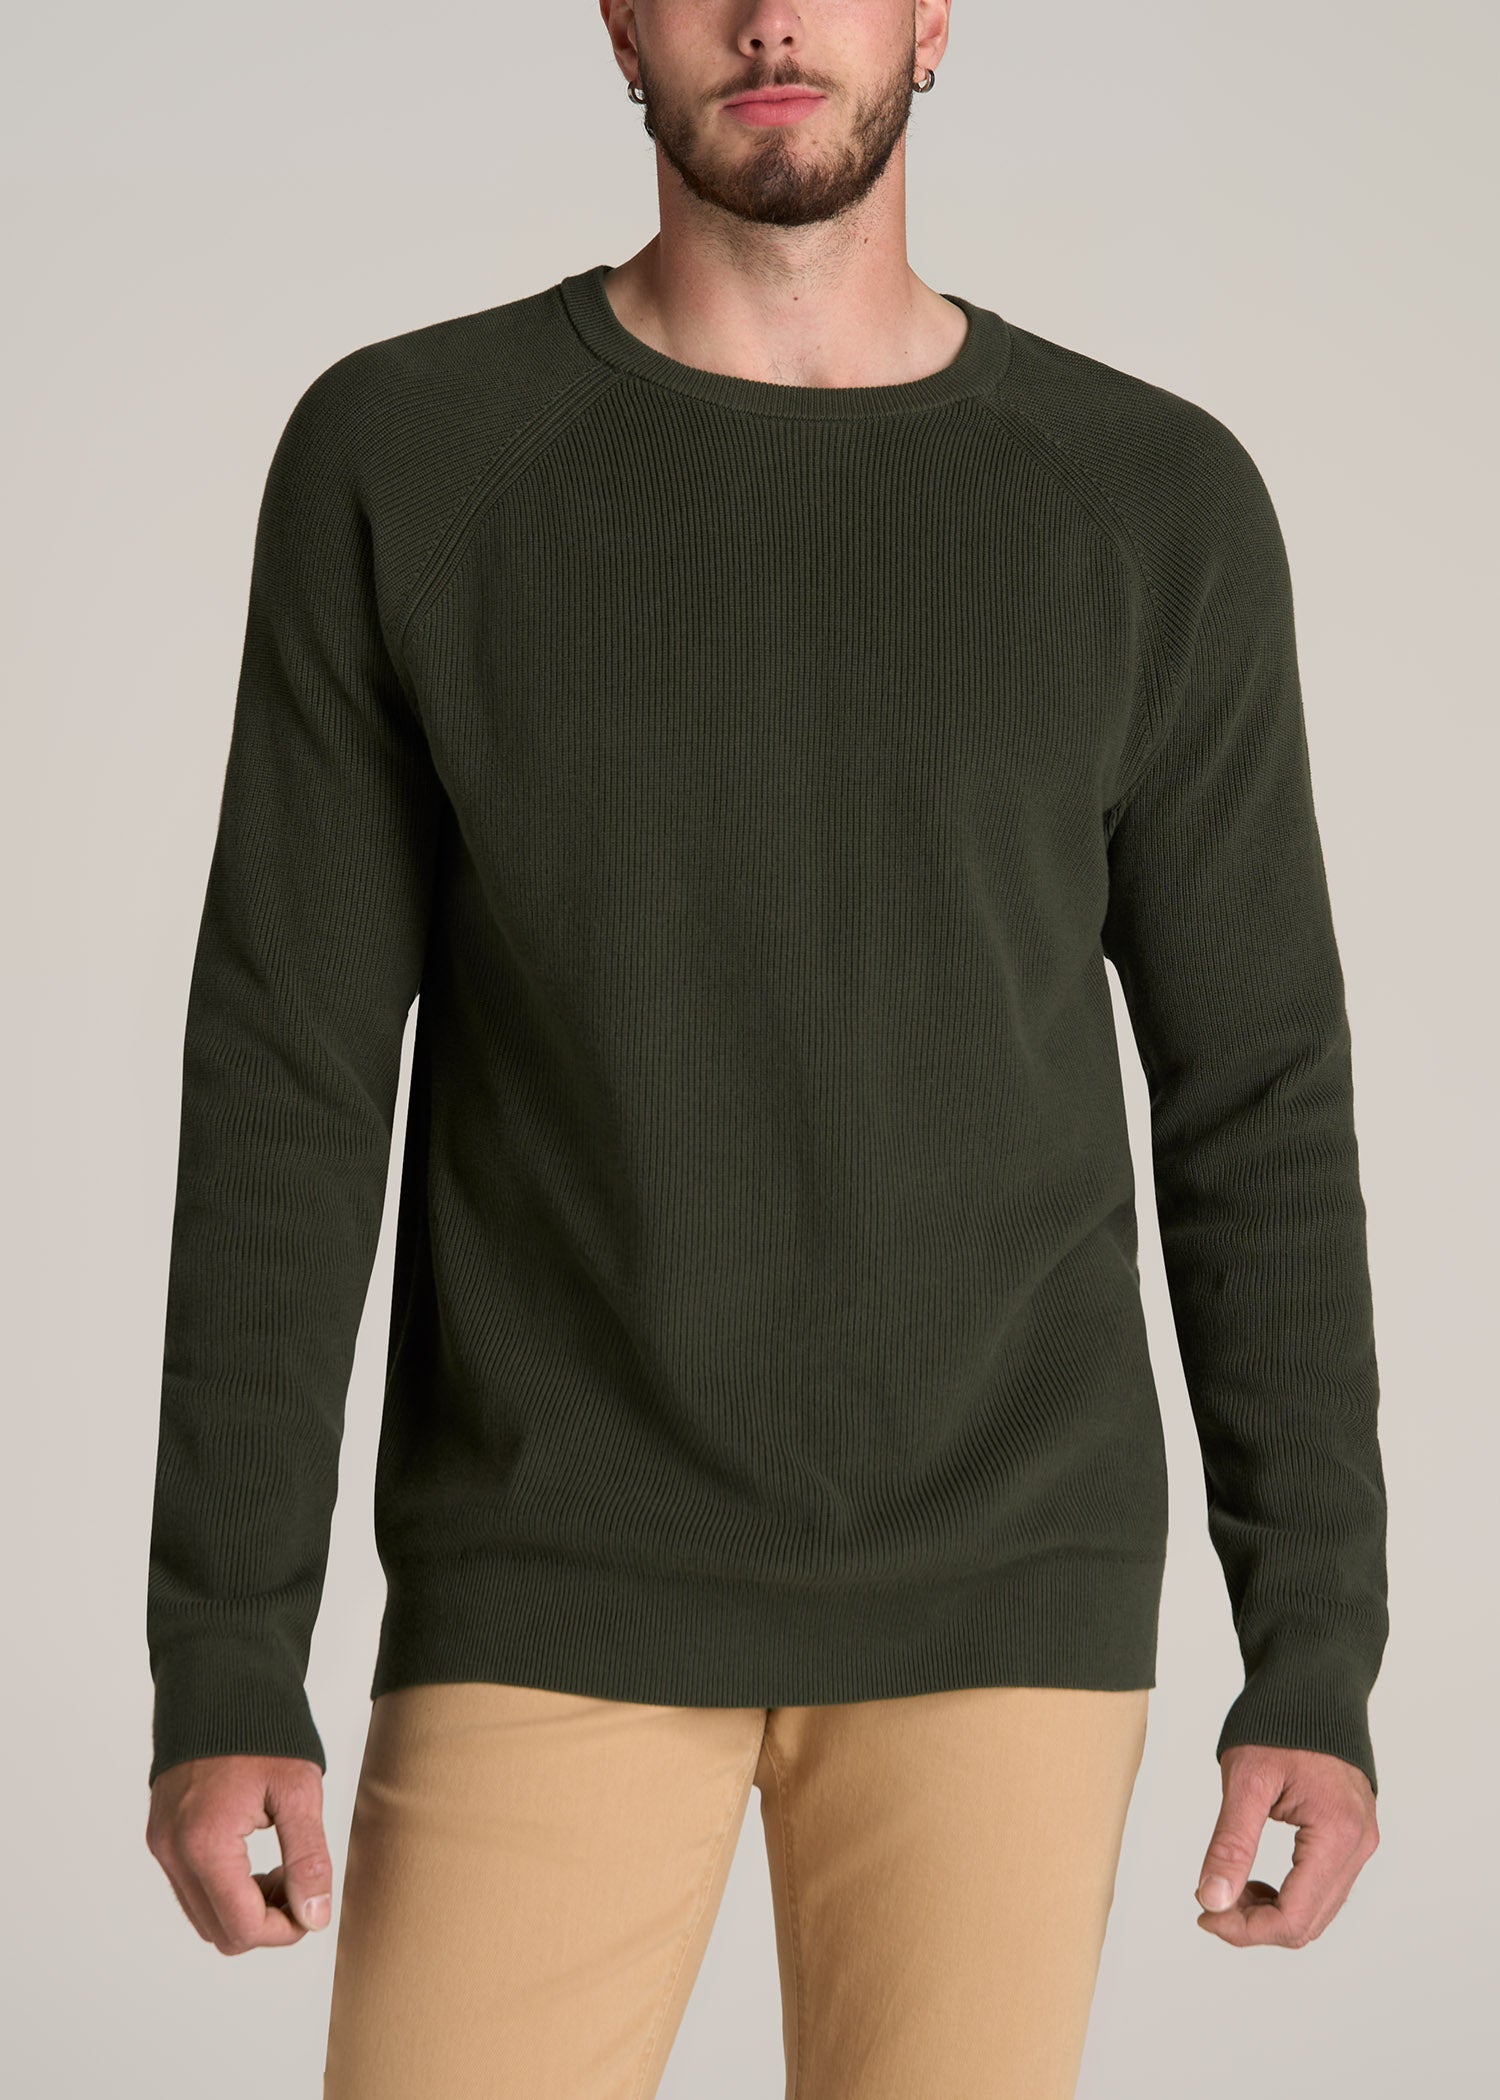 American-Tall-Men-Textured-Knit-Sweater-Dark-Olive-Green-front